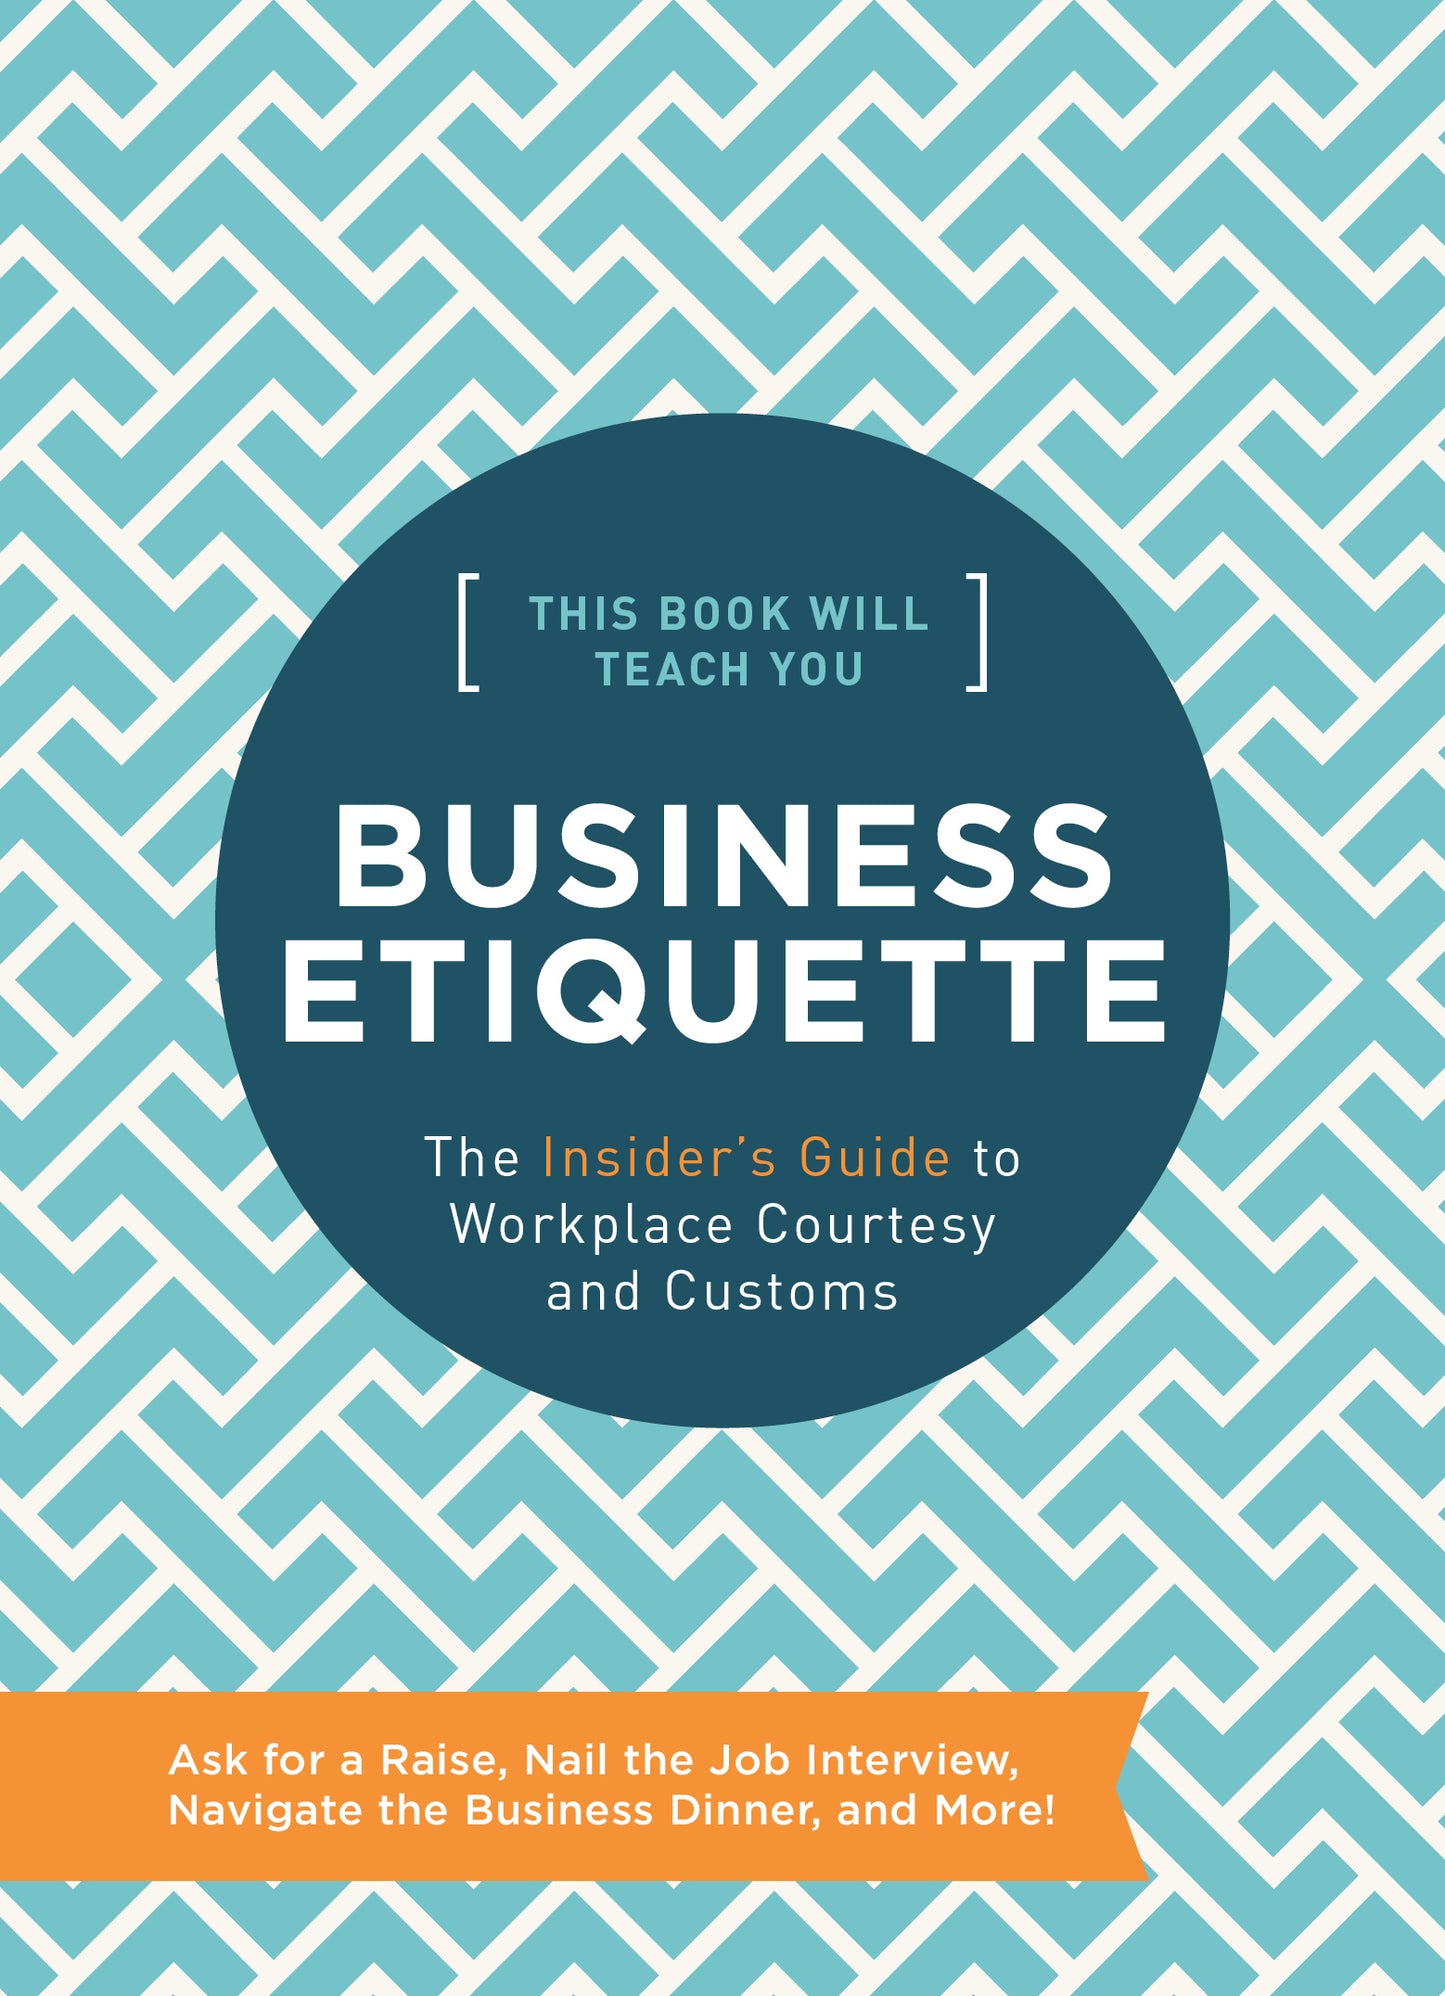 This Book Will Teach You Business Etiquette: The Insider's Guide to Workplace Courtesy and Customs